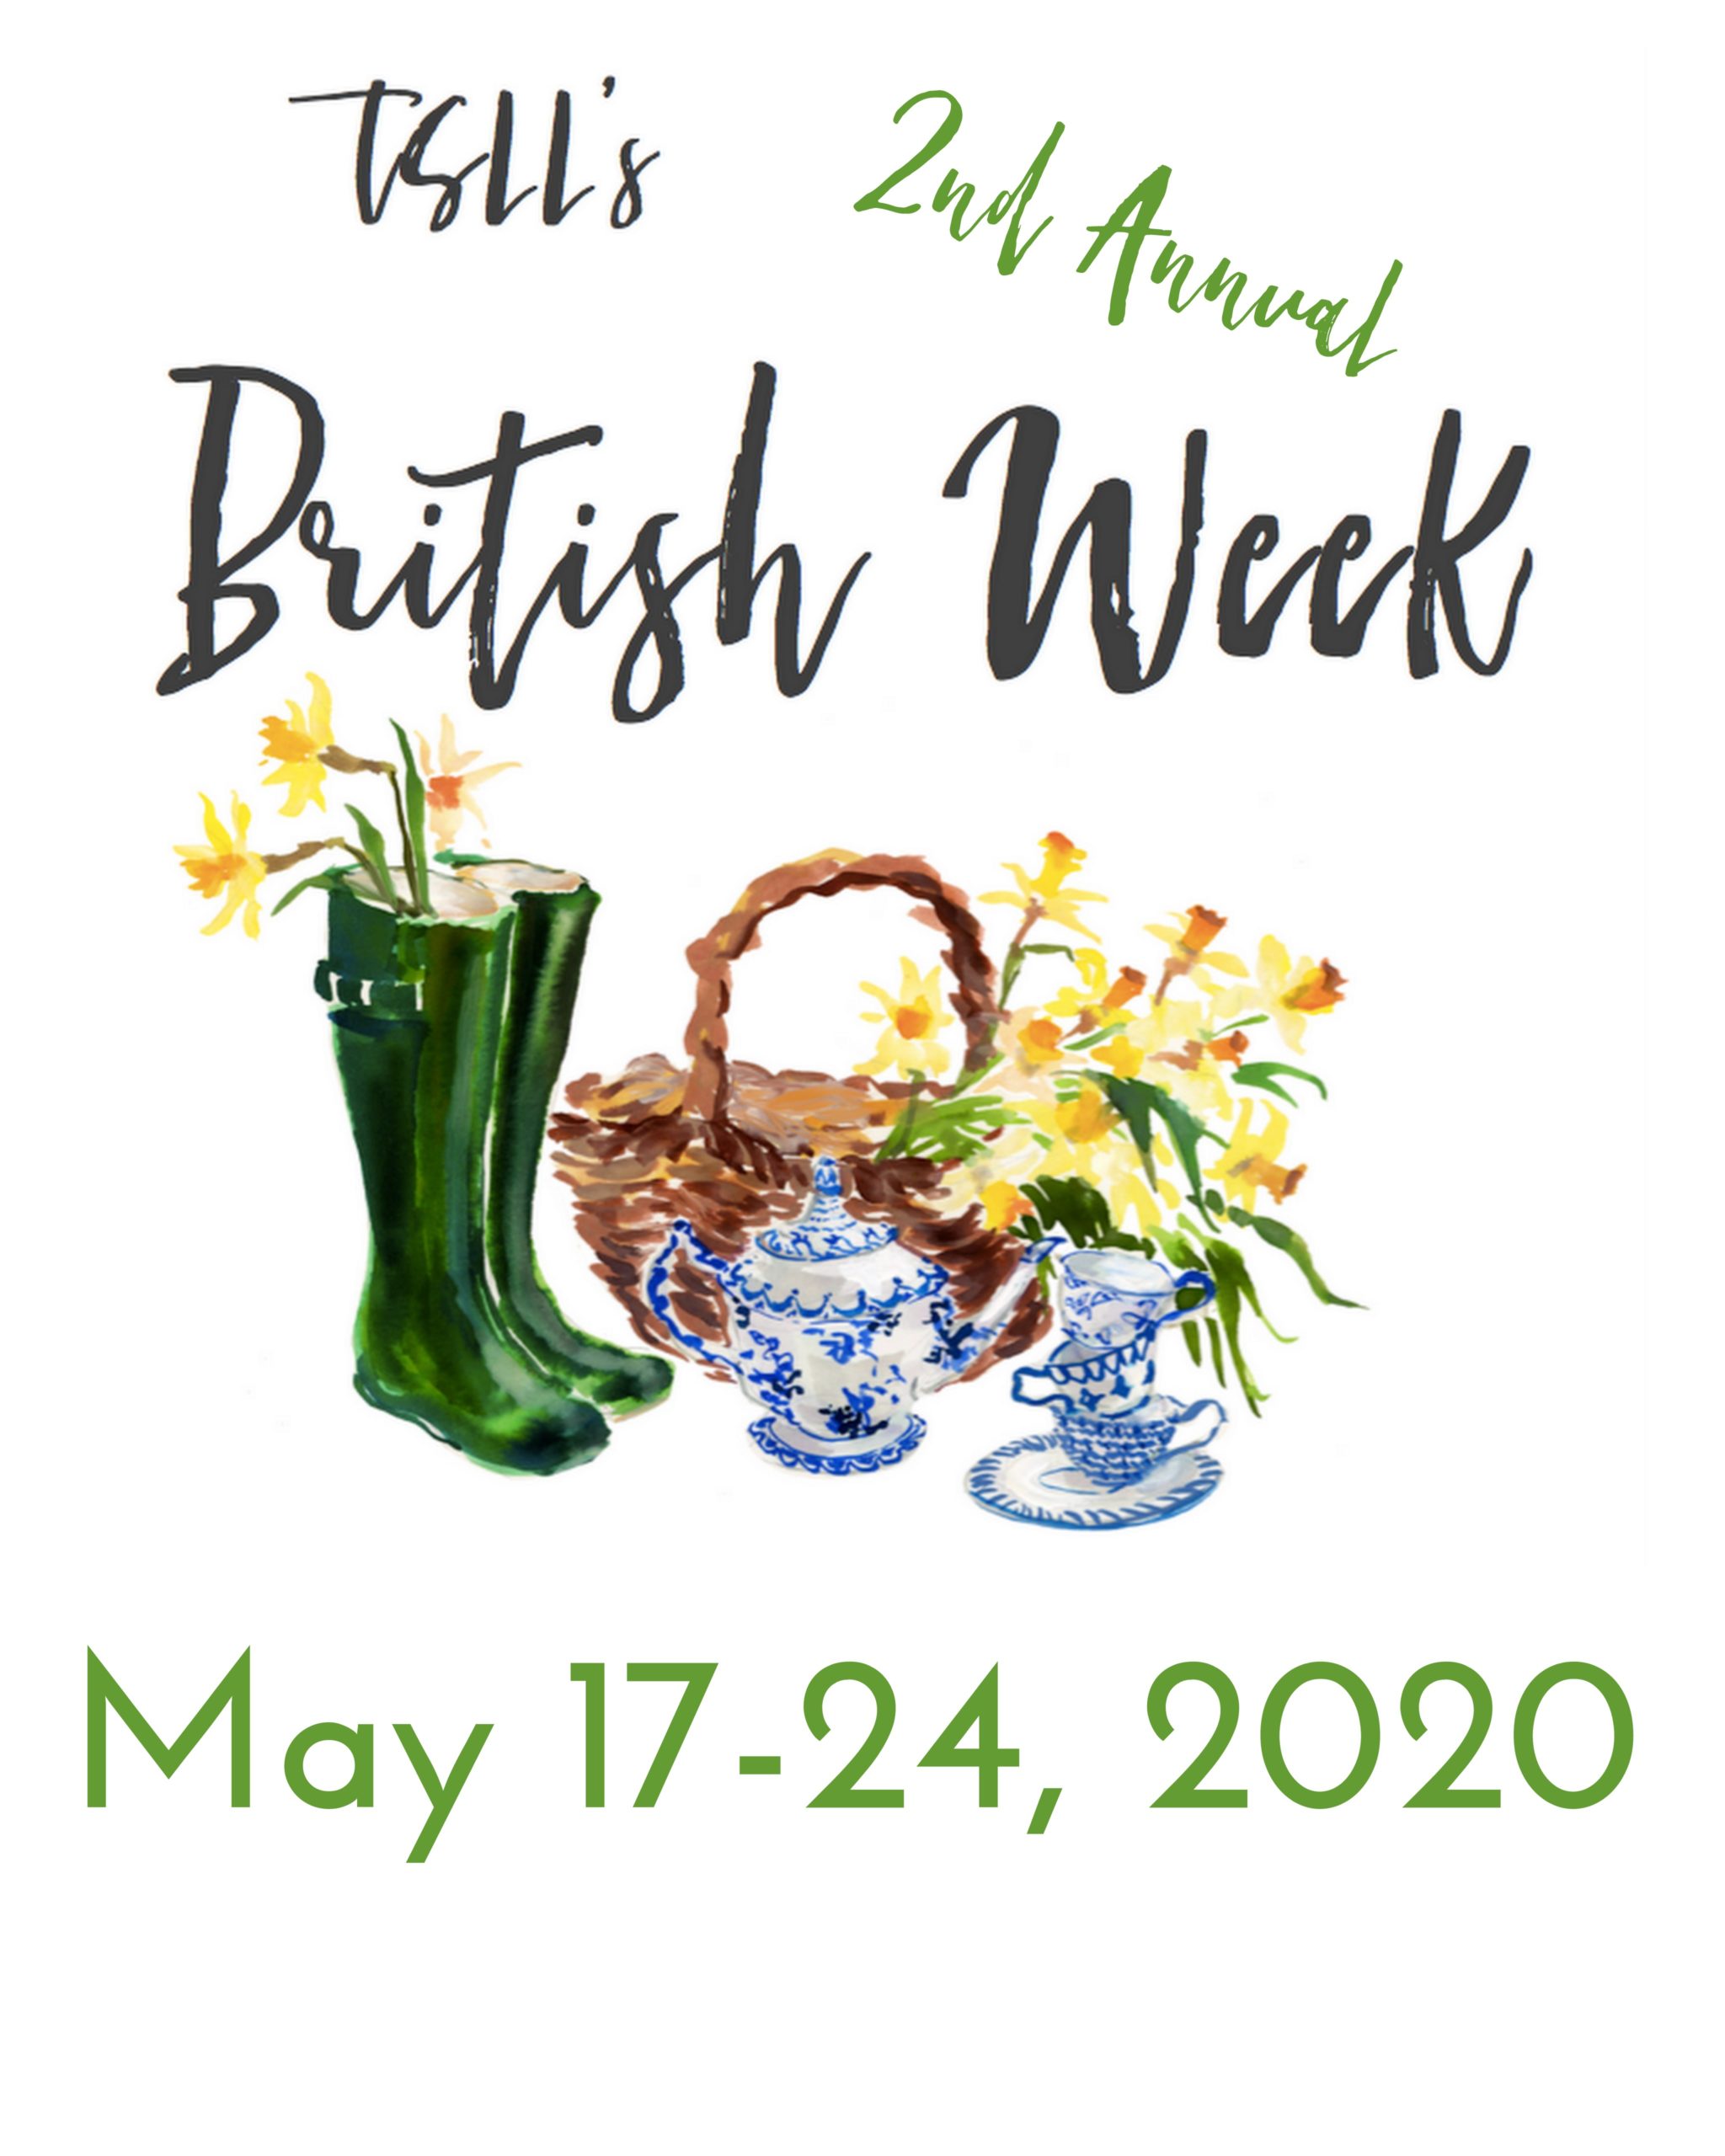 Welcome to TSLL’s 2nd Annual British Week & the First Giveaway!